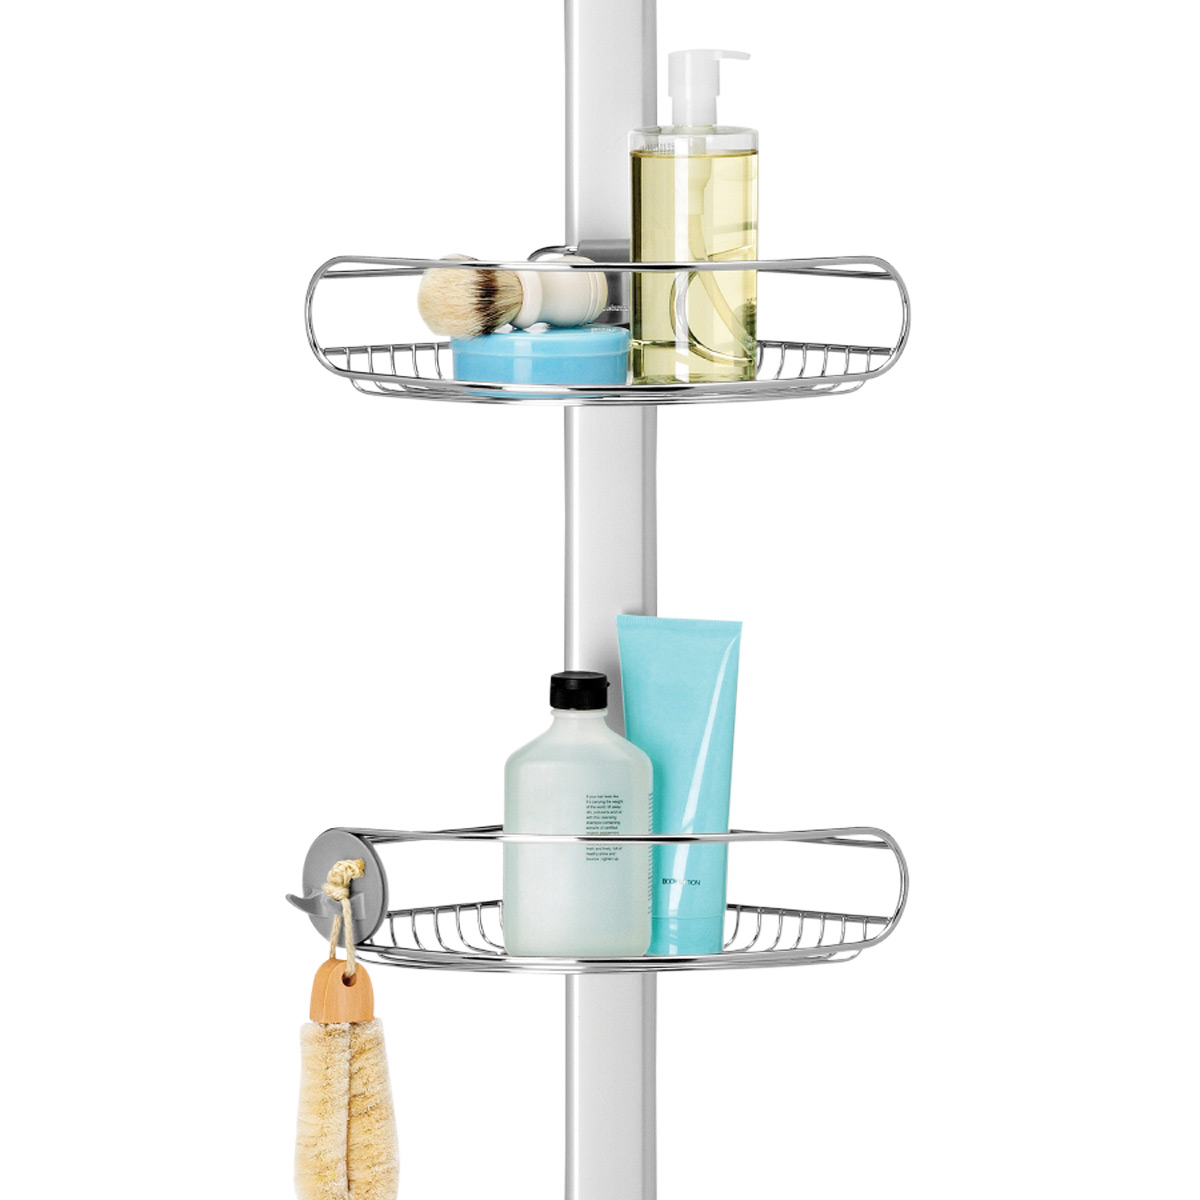 tension pole shower caddy